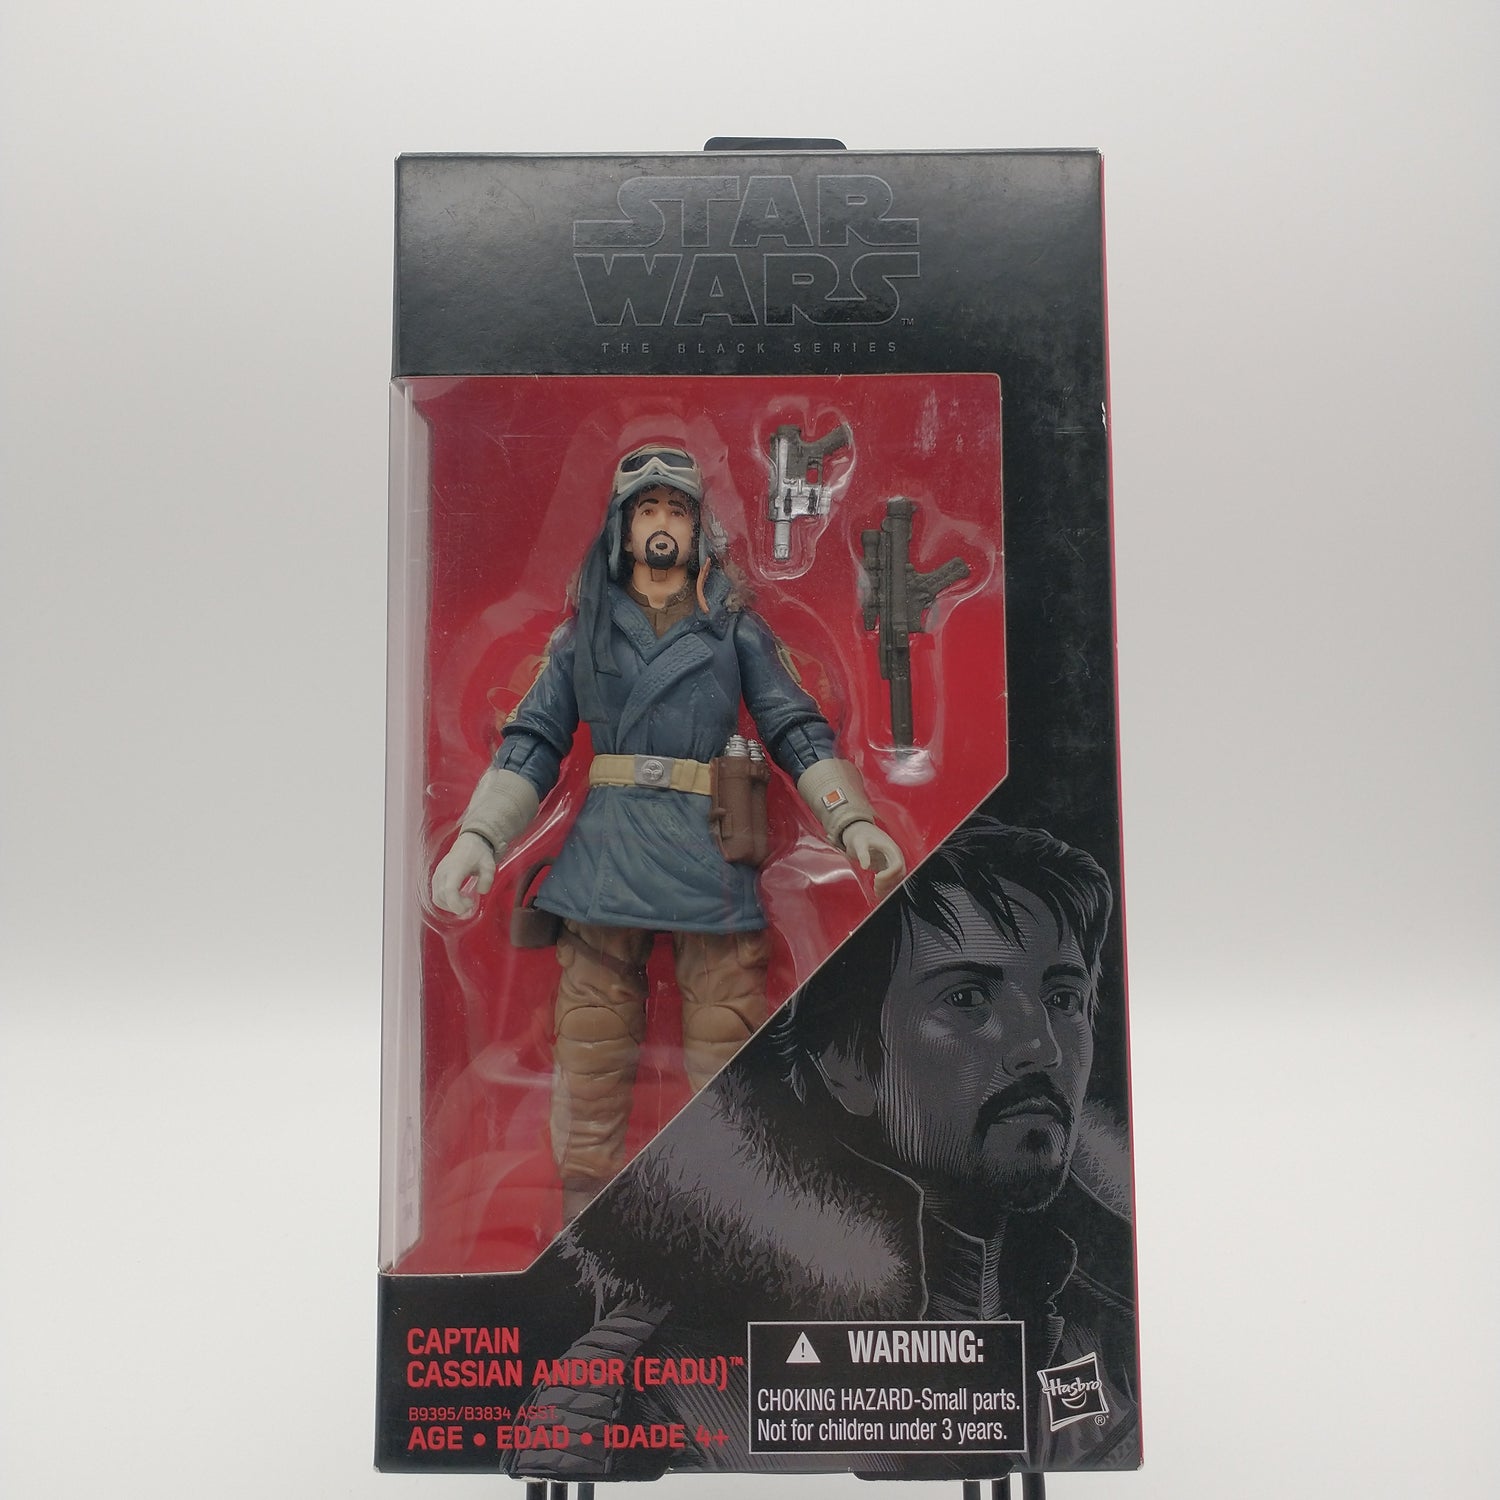 The front of the box and bubble. The action figure inside is wearing a blue coat, a hat with goggles, brown pants, and white golves. There are two guns next to him in the bubble.